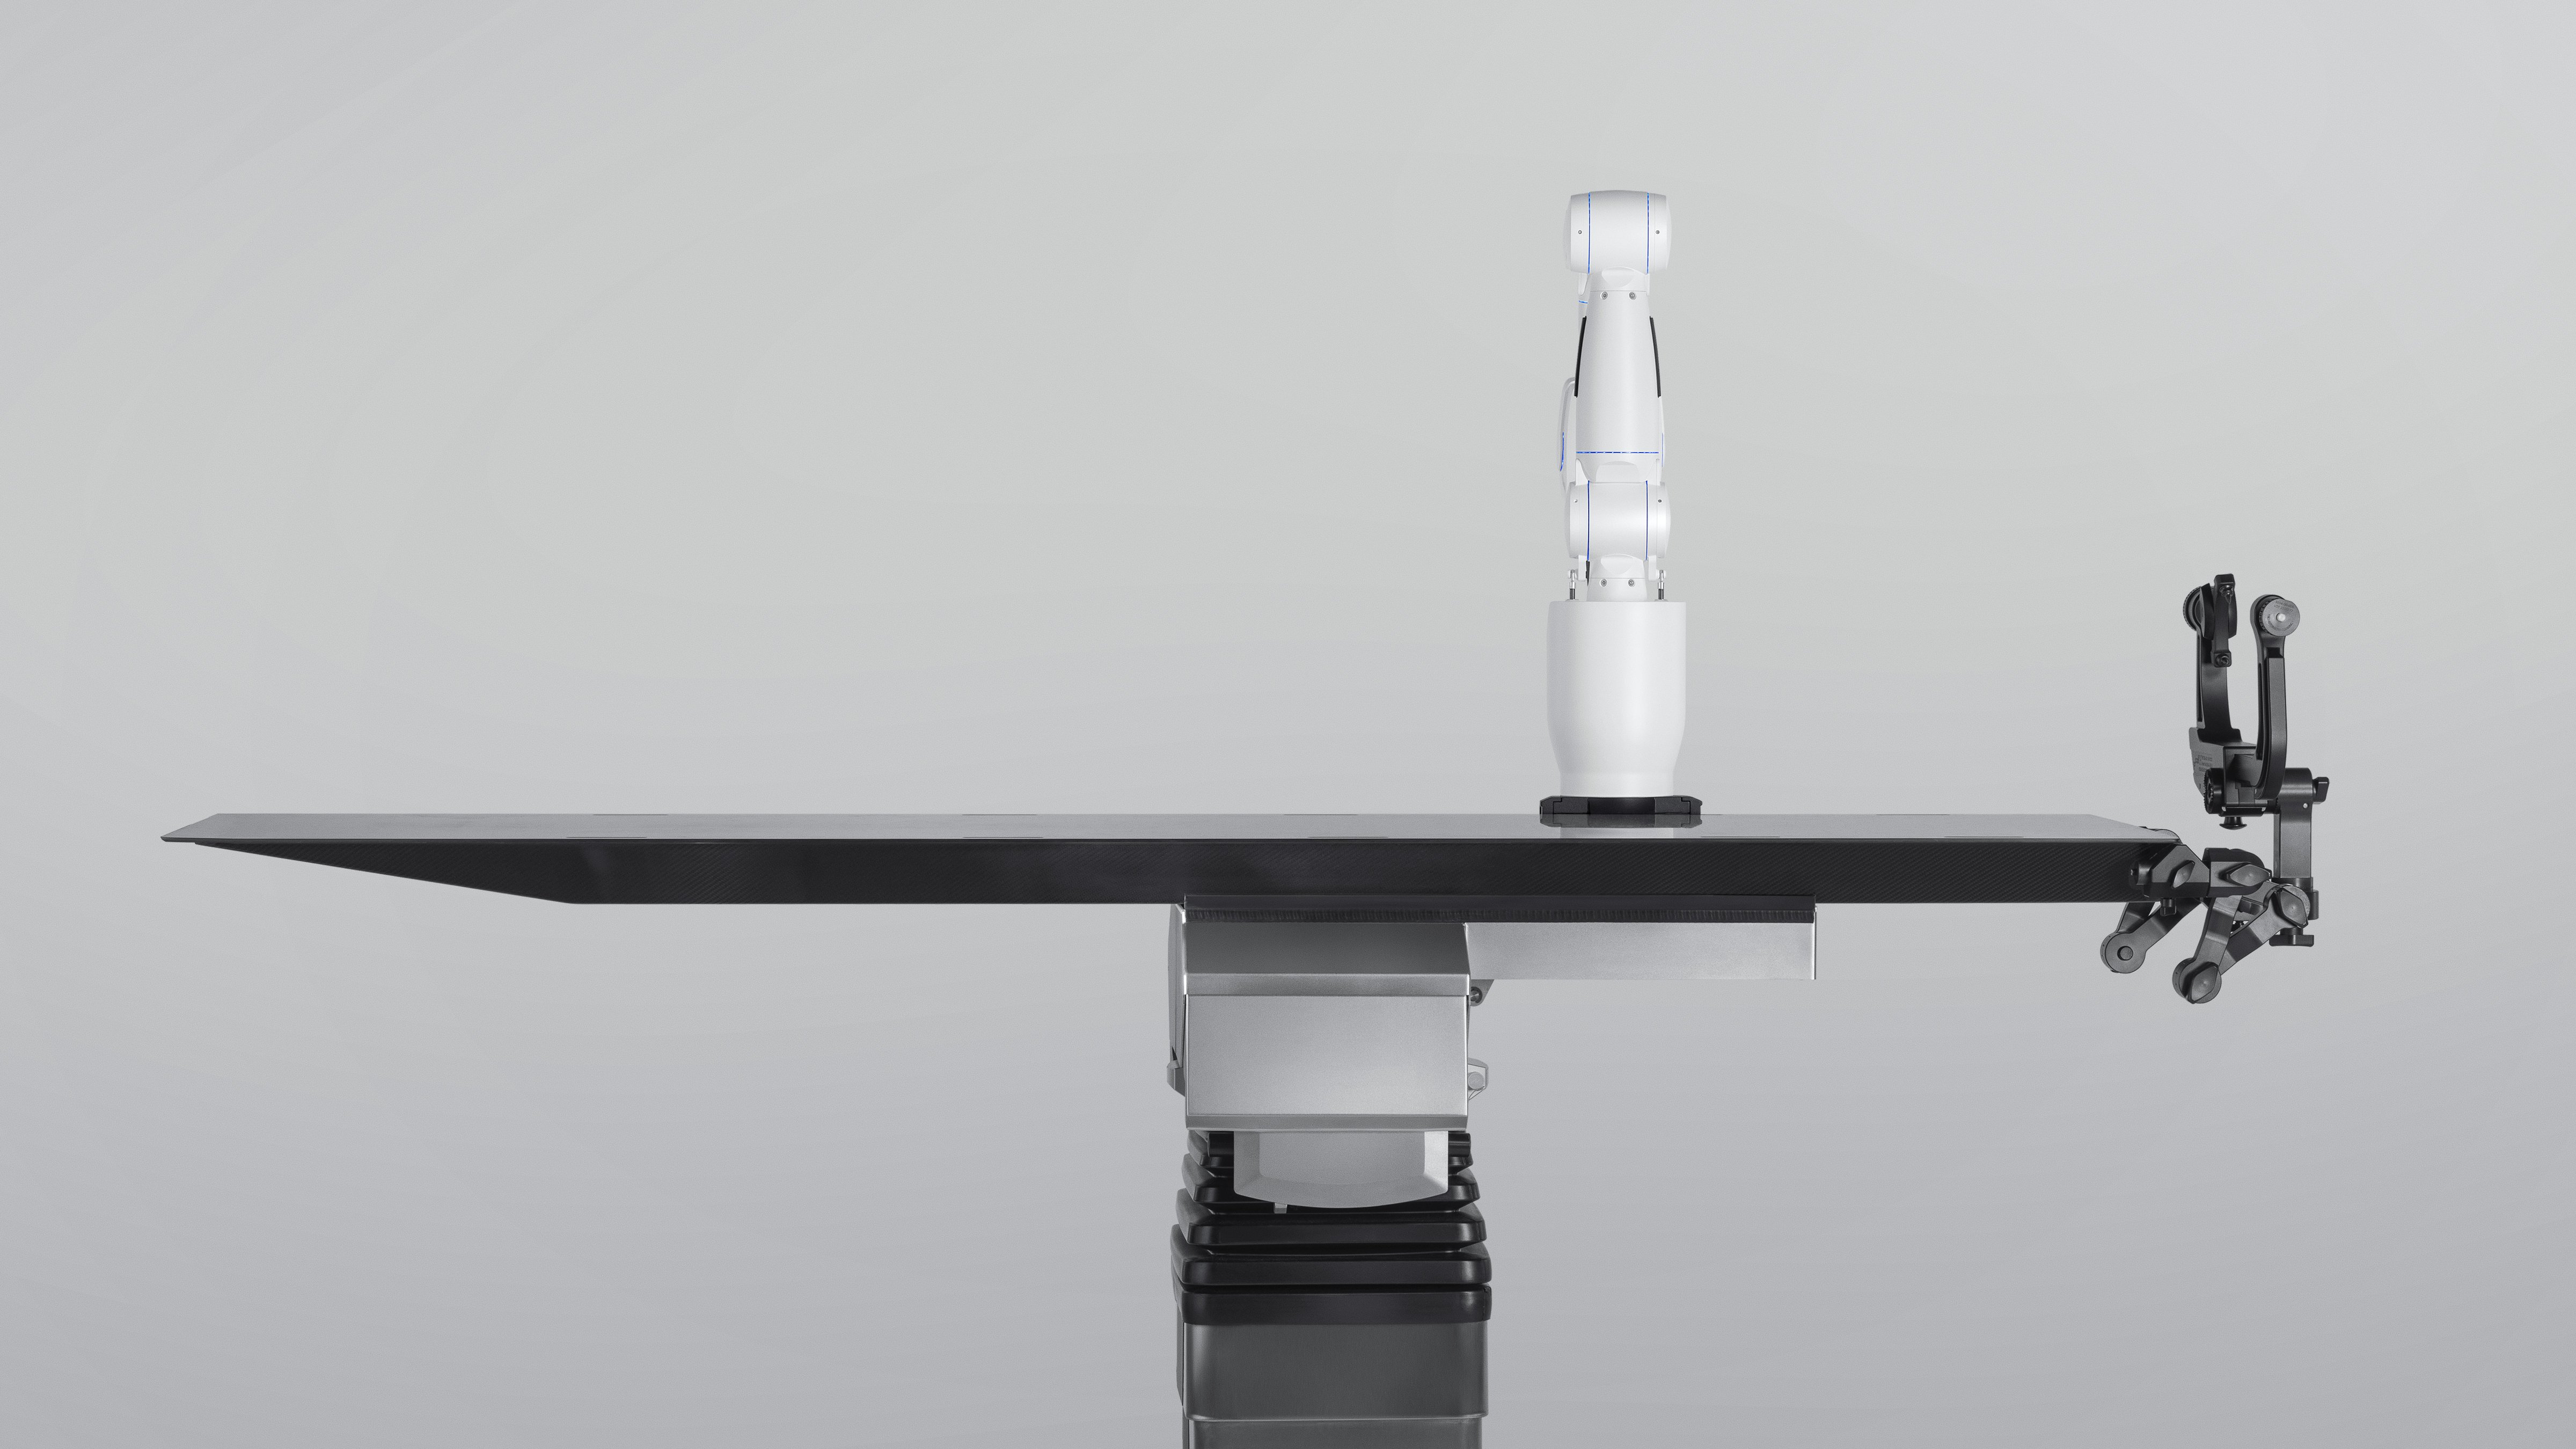 Cirq: Table-mounted with zero footprint